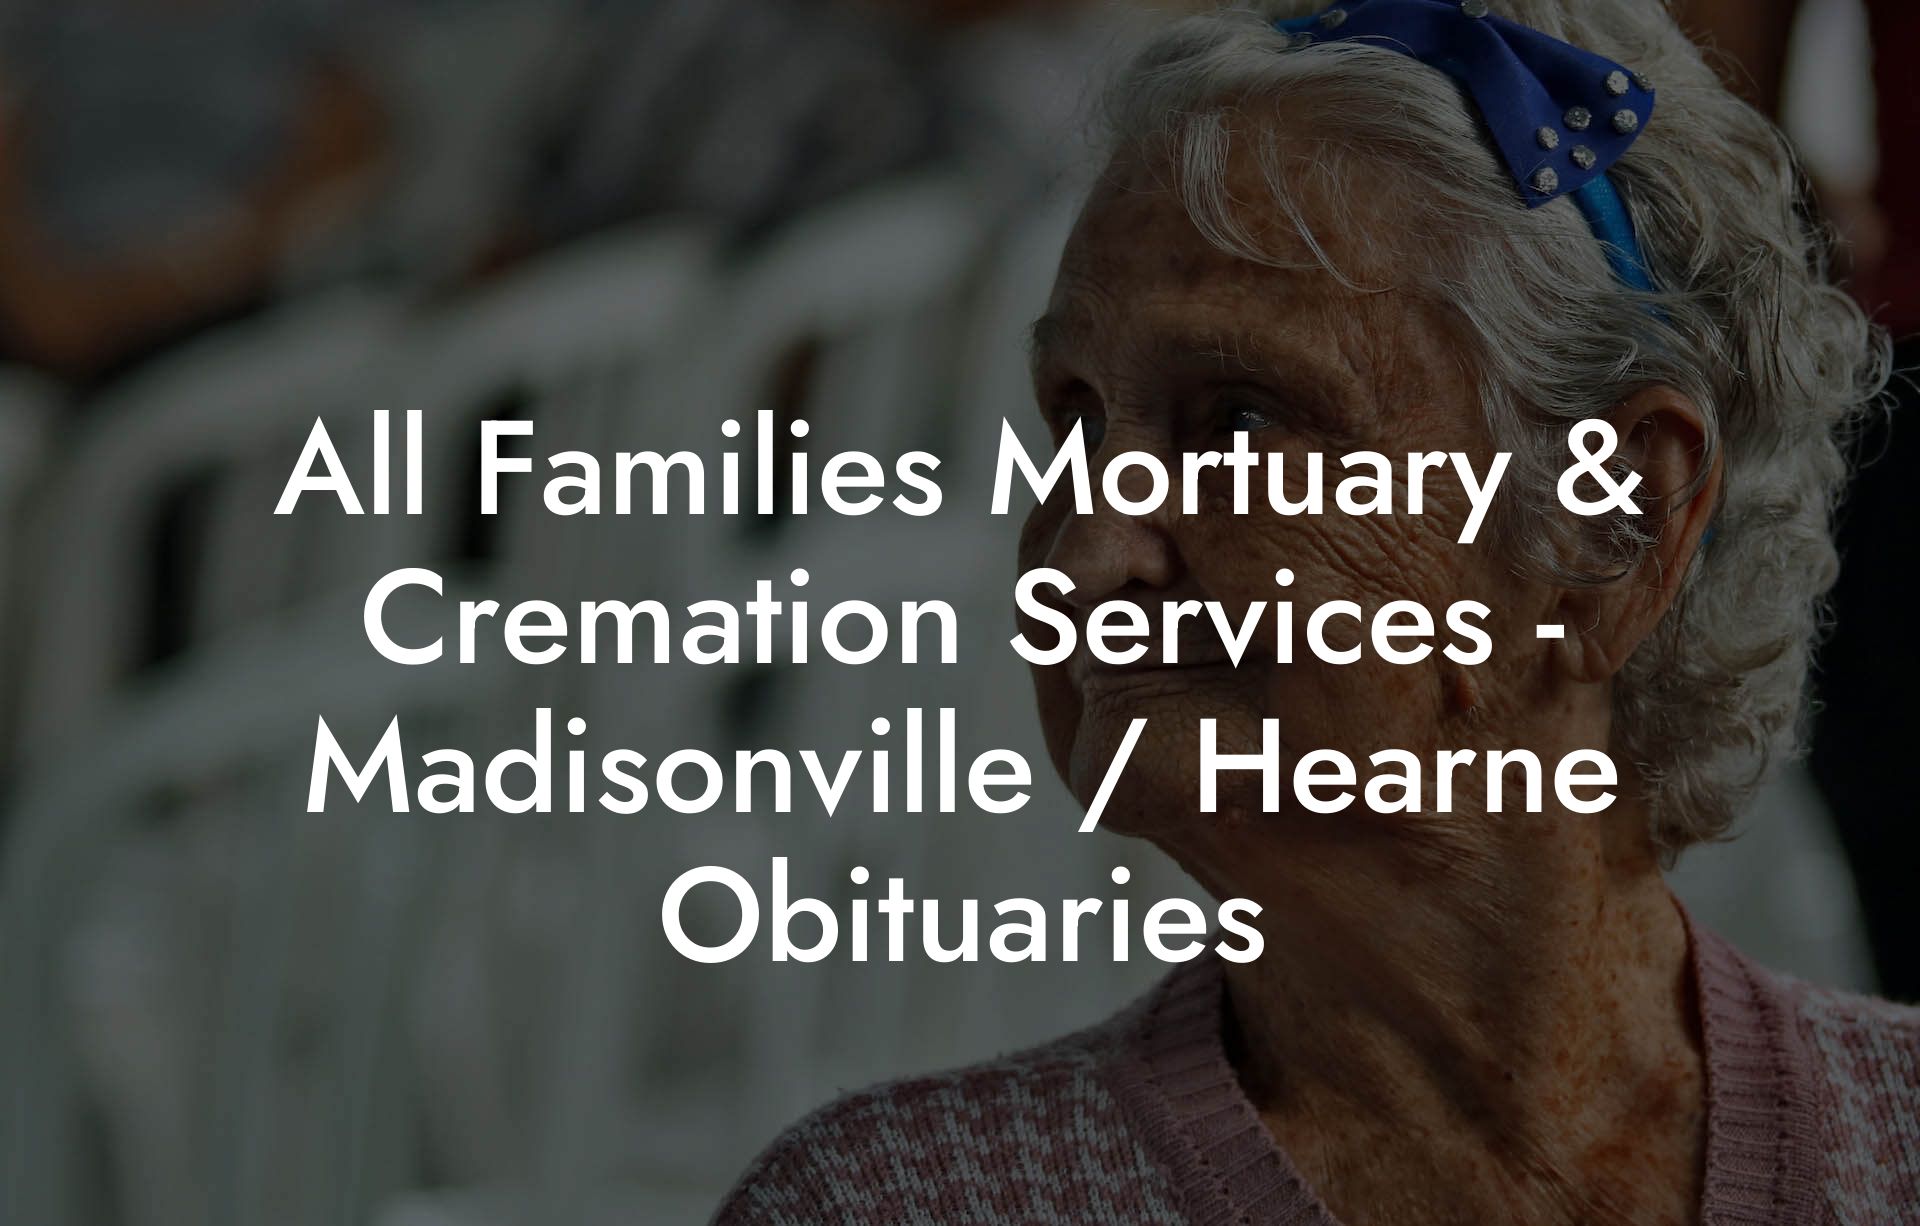 All Families Mortuary & Cremation Services - Madisonville / Hearne Obituaries